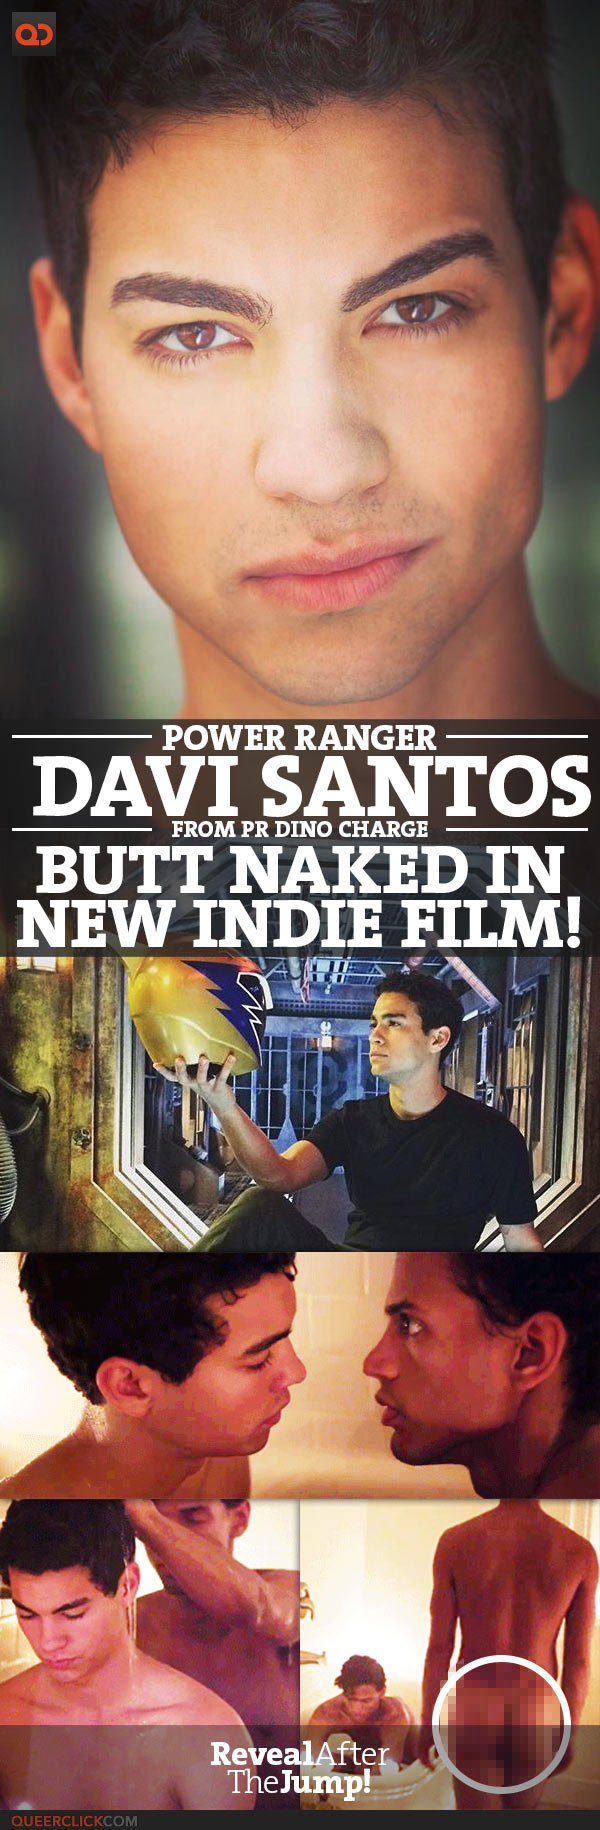 Power Ranger Actor Davi Santos, From PR Dino Charge, Butt Naked In New Indie Film!